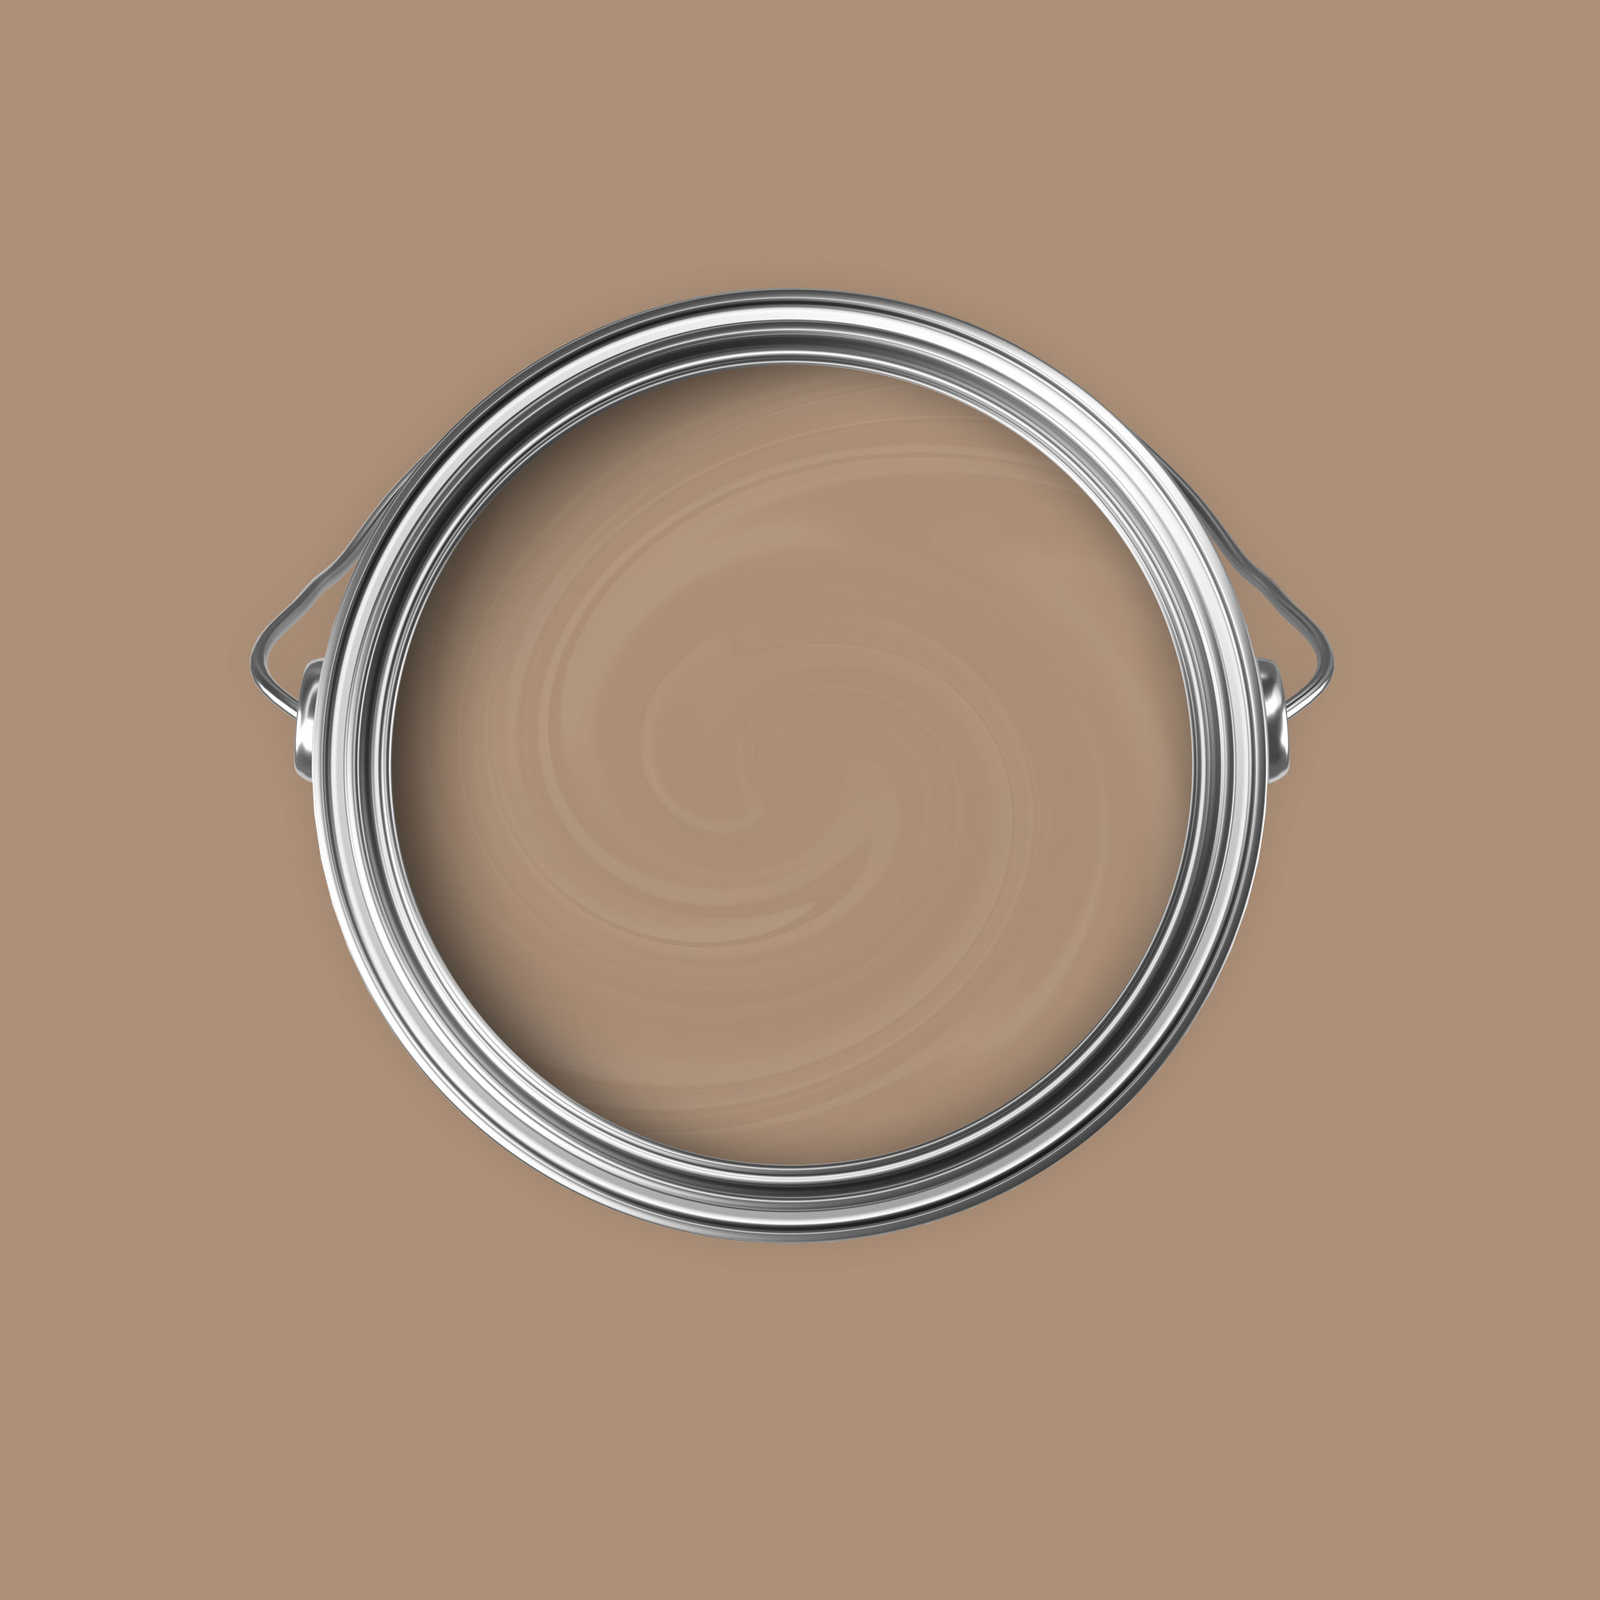             Premium Wall Paint Earthy Light Brown »Modern Mud« NW718 – 5 litre
        